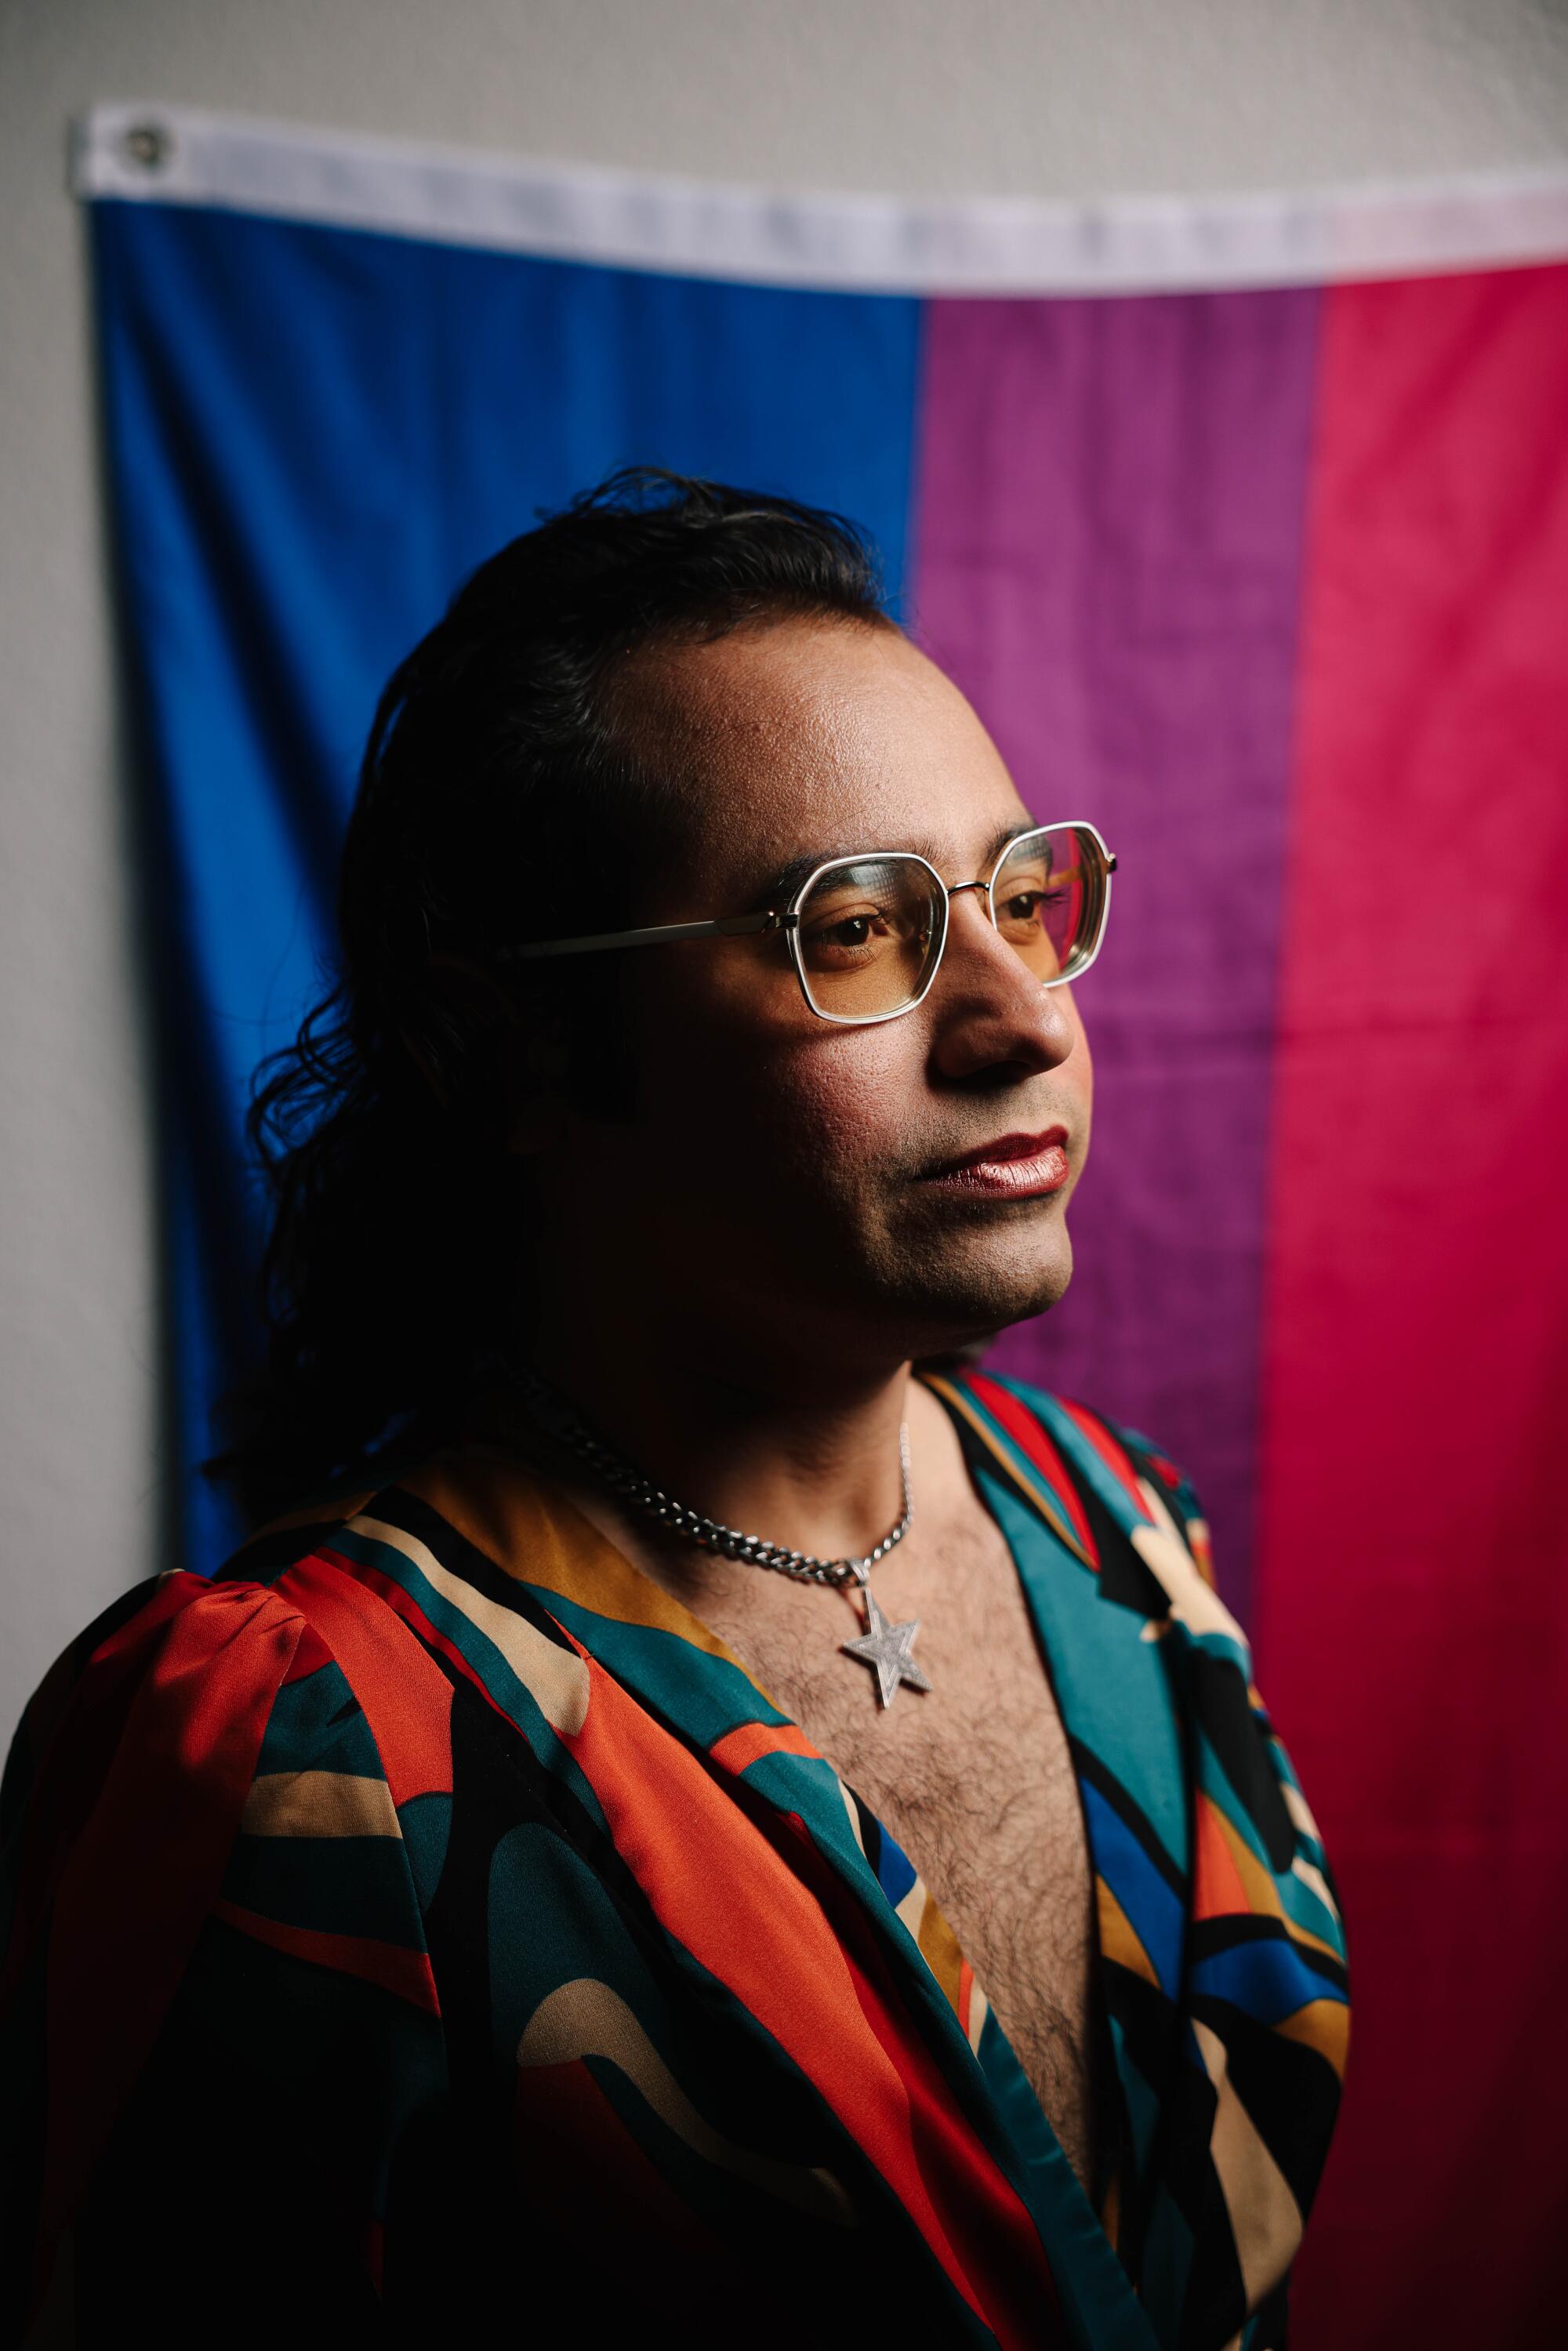 Raul Urena poses for a portrait in front of a rainbow flag.